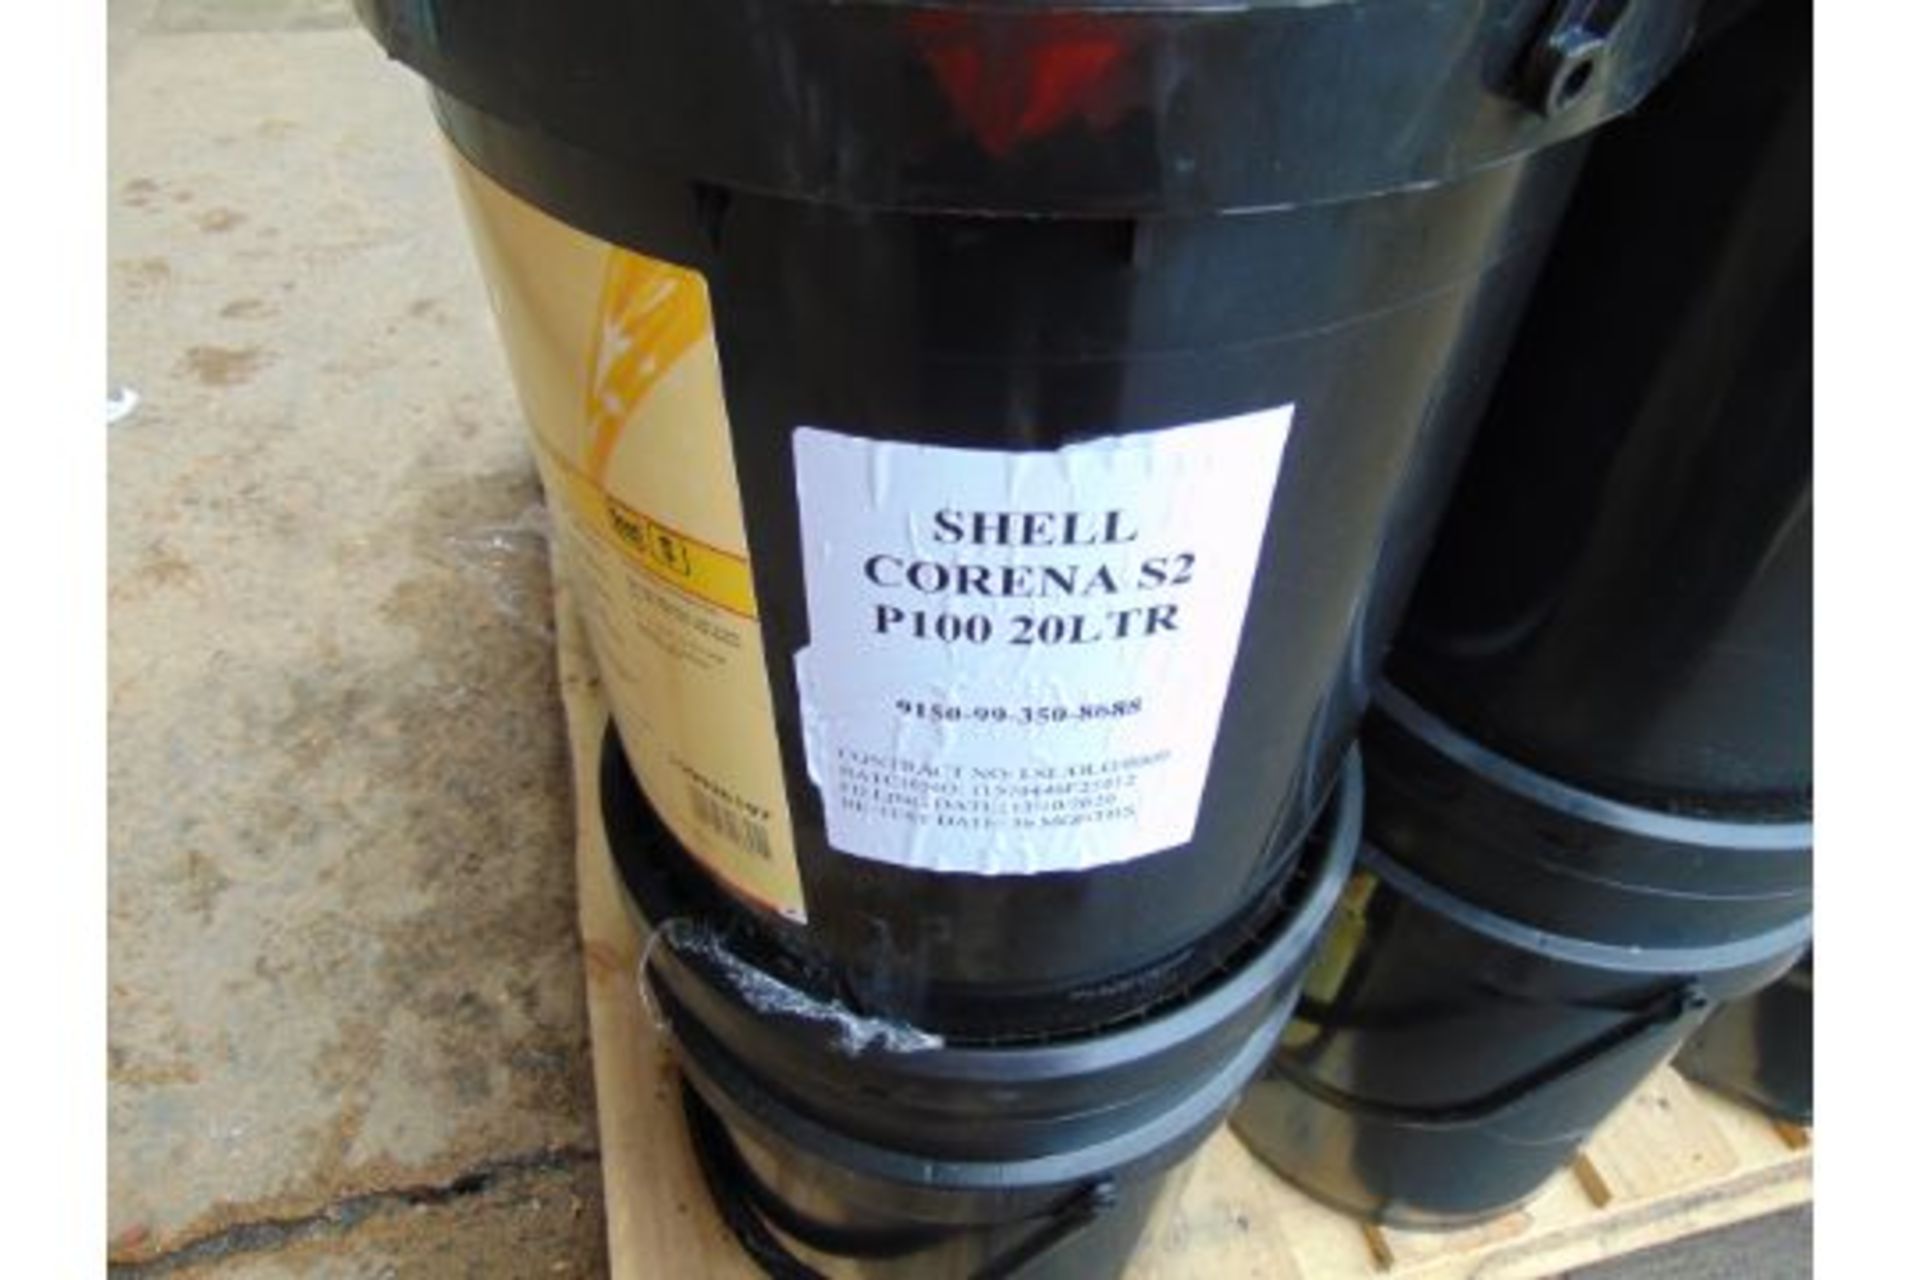 19 x 20 Litre Drums of Shell Corena S2 P100 High Quality Lubricating Oil - Bild 3 aus 5